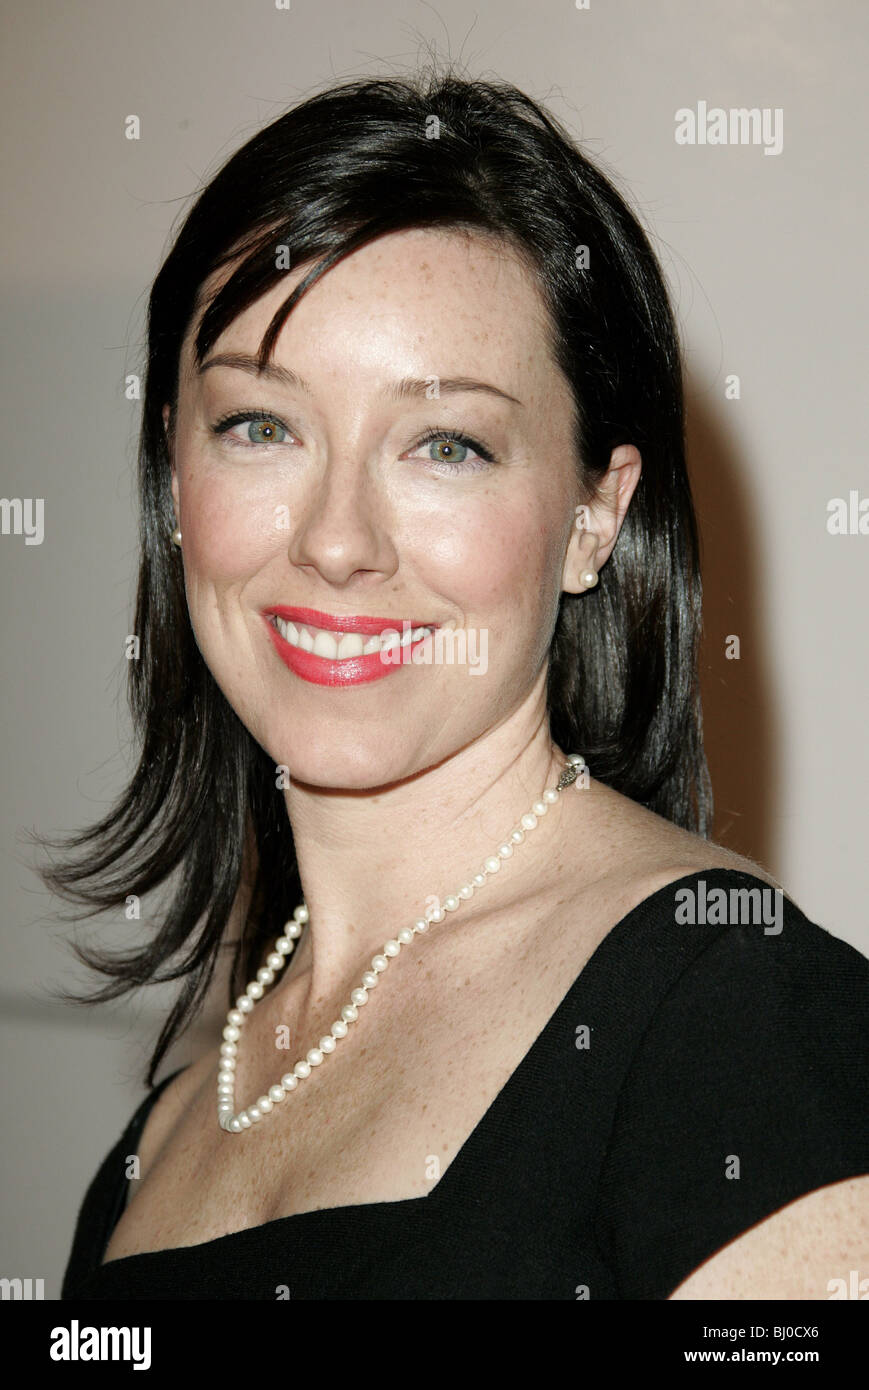 MOLLY PARKER ACTRESS LOS ANGELES COUNTY MUSEUM OF ART  LOS ANGELES  USA 08/12/2005 Stock Photo